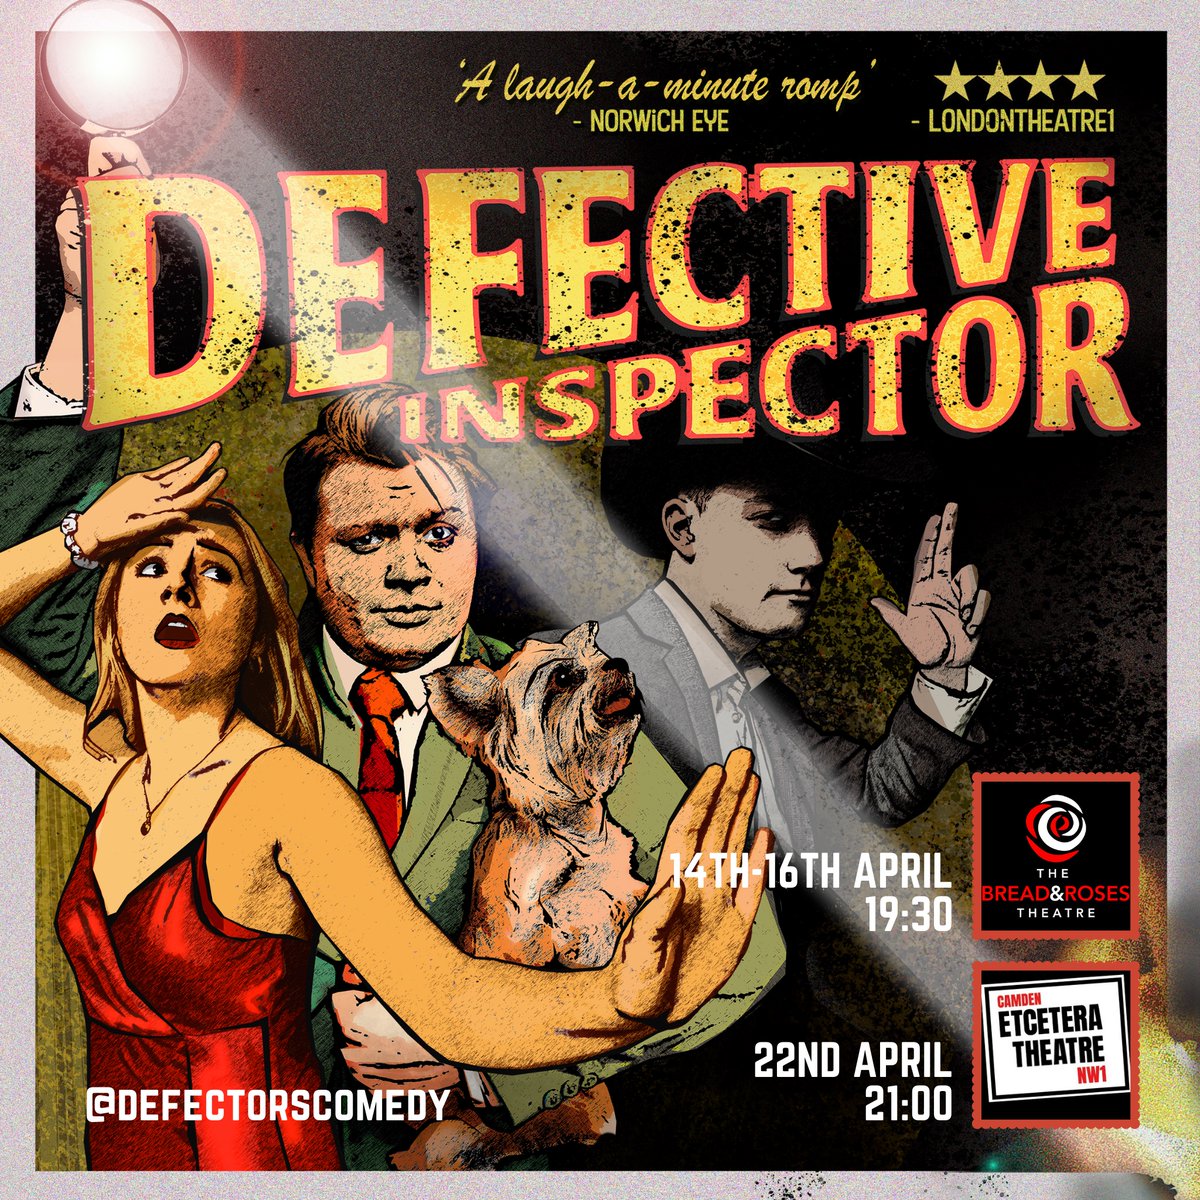 Once u've seen #Telethon @ShoreditchTH go c @defectorscomedy's DEFECTIVE INSPECTOR! This ‘laugh-a-minute romp’ finds the sweet spot between The 39 Steps & Garth Marenghi’s Darkplace! ⭐️⭐️⭐️⭐️ - LondonTheatre1 Book here! 🎟 - breadandrosestheatre.co.uk/whats-on 🎟 - etceteratheatre.com/?id=2&wod=04/2…